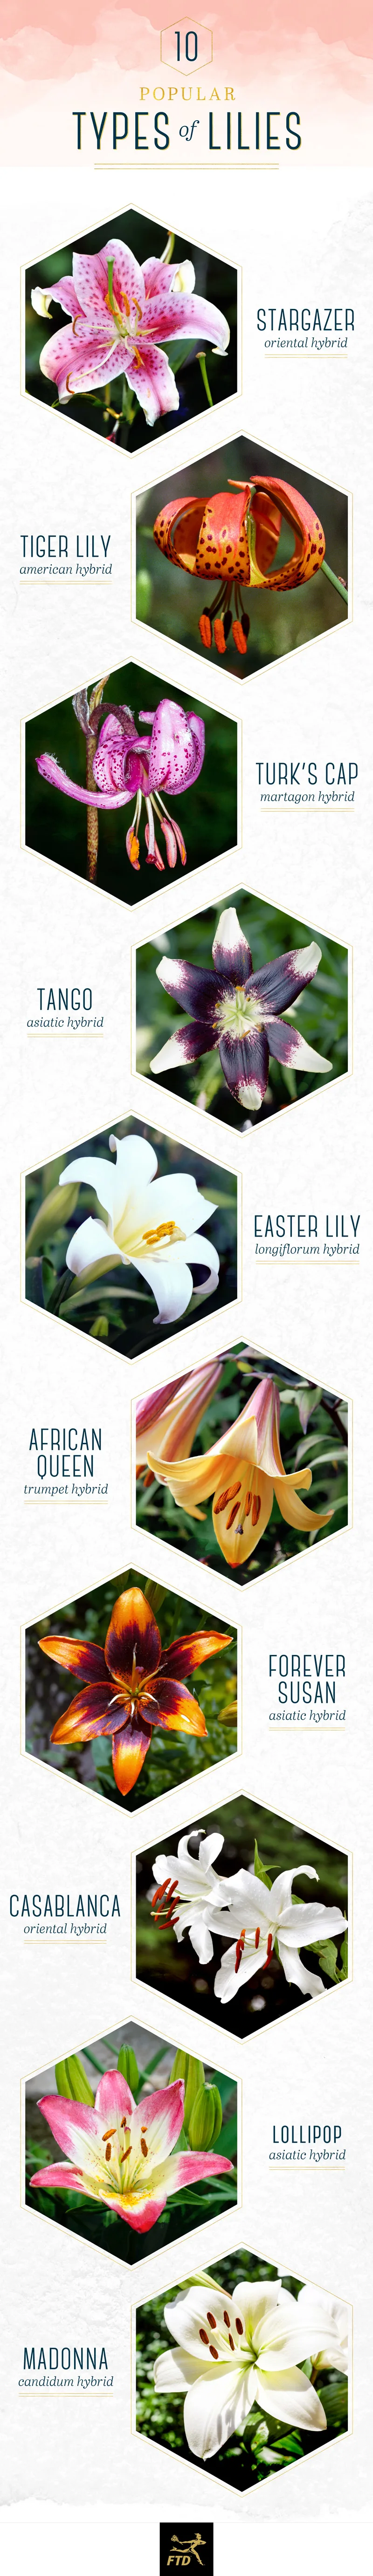 types-of-lilies-IG